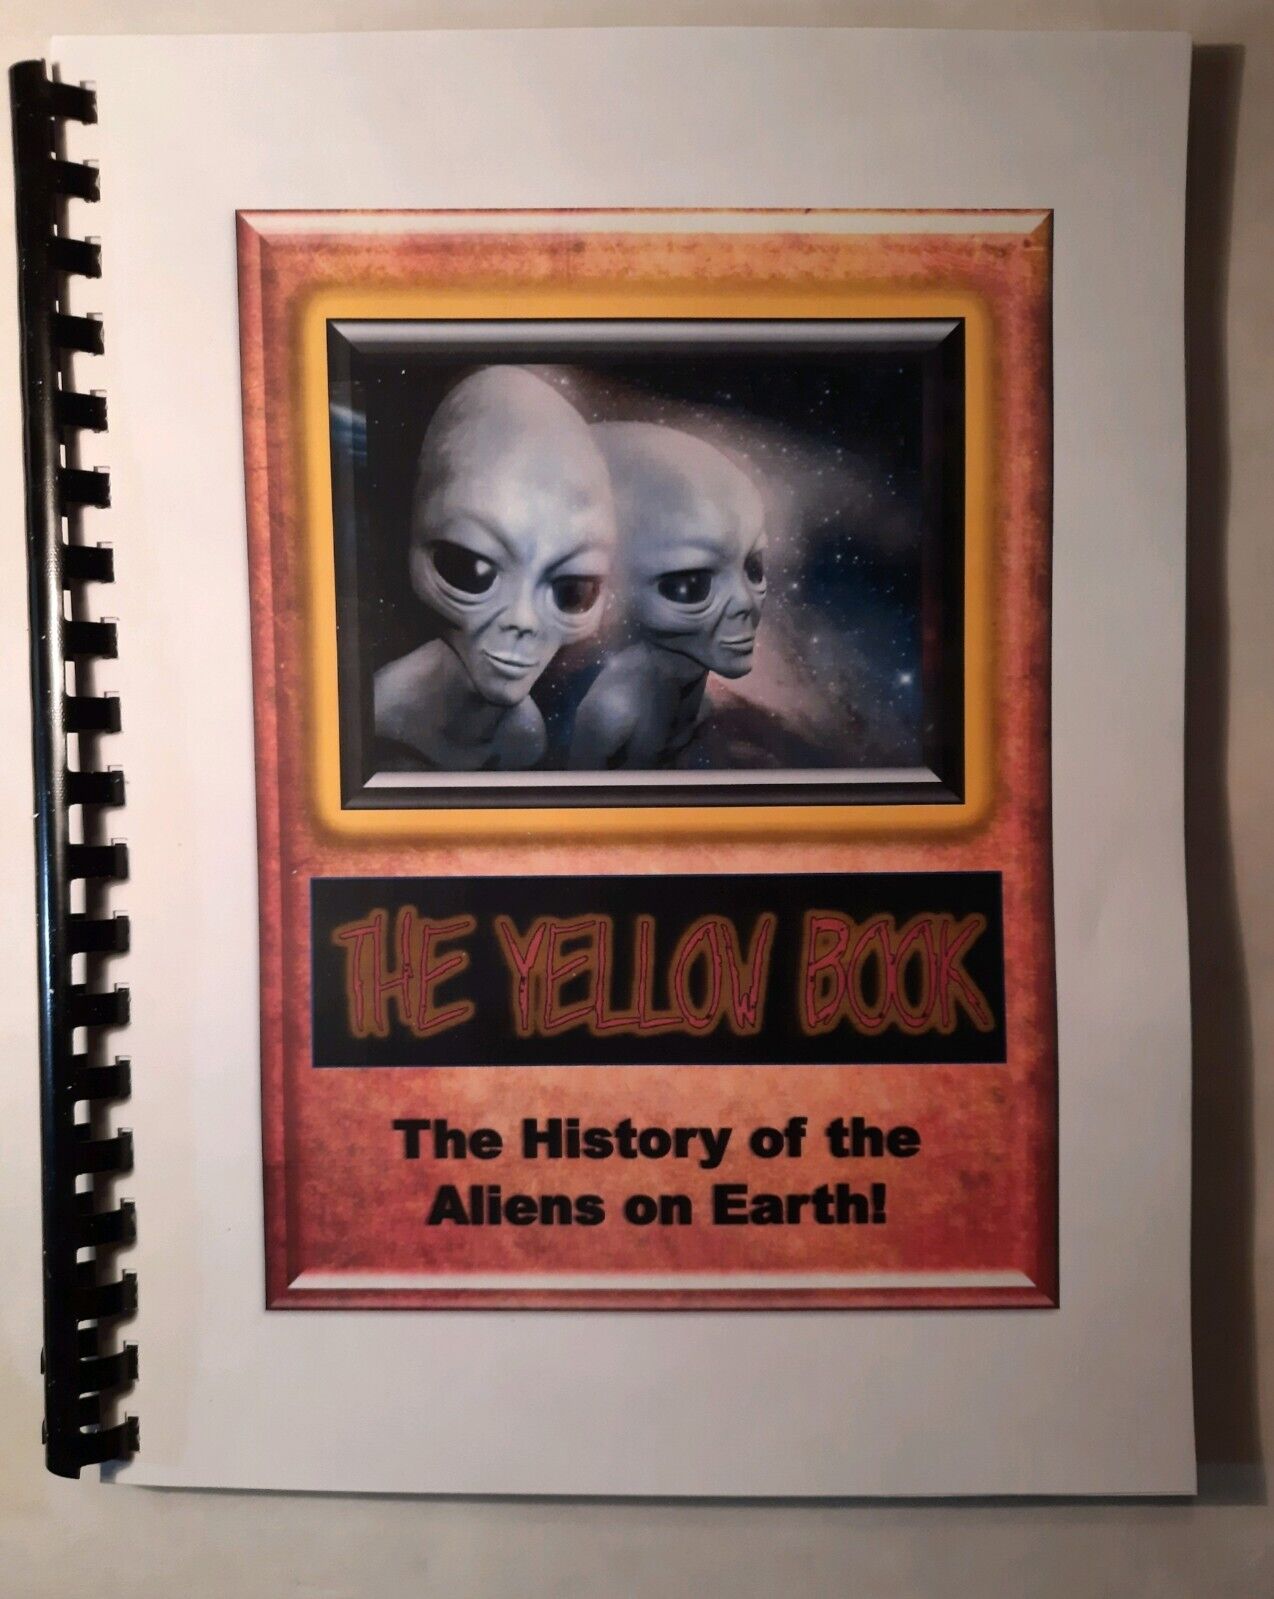 YELLOW BOOK: History of the Aliens on Earth